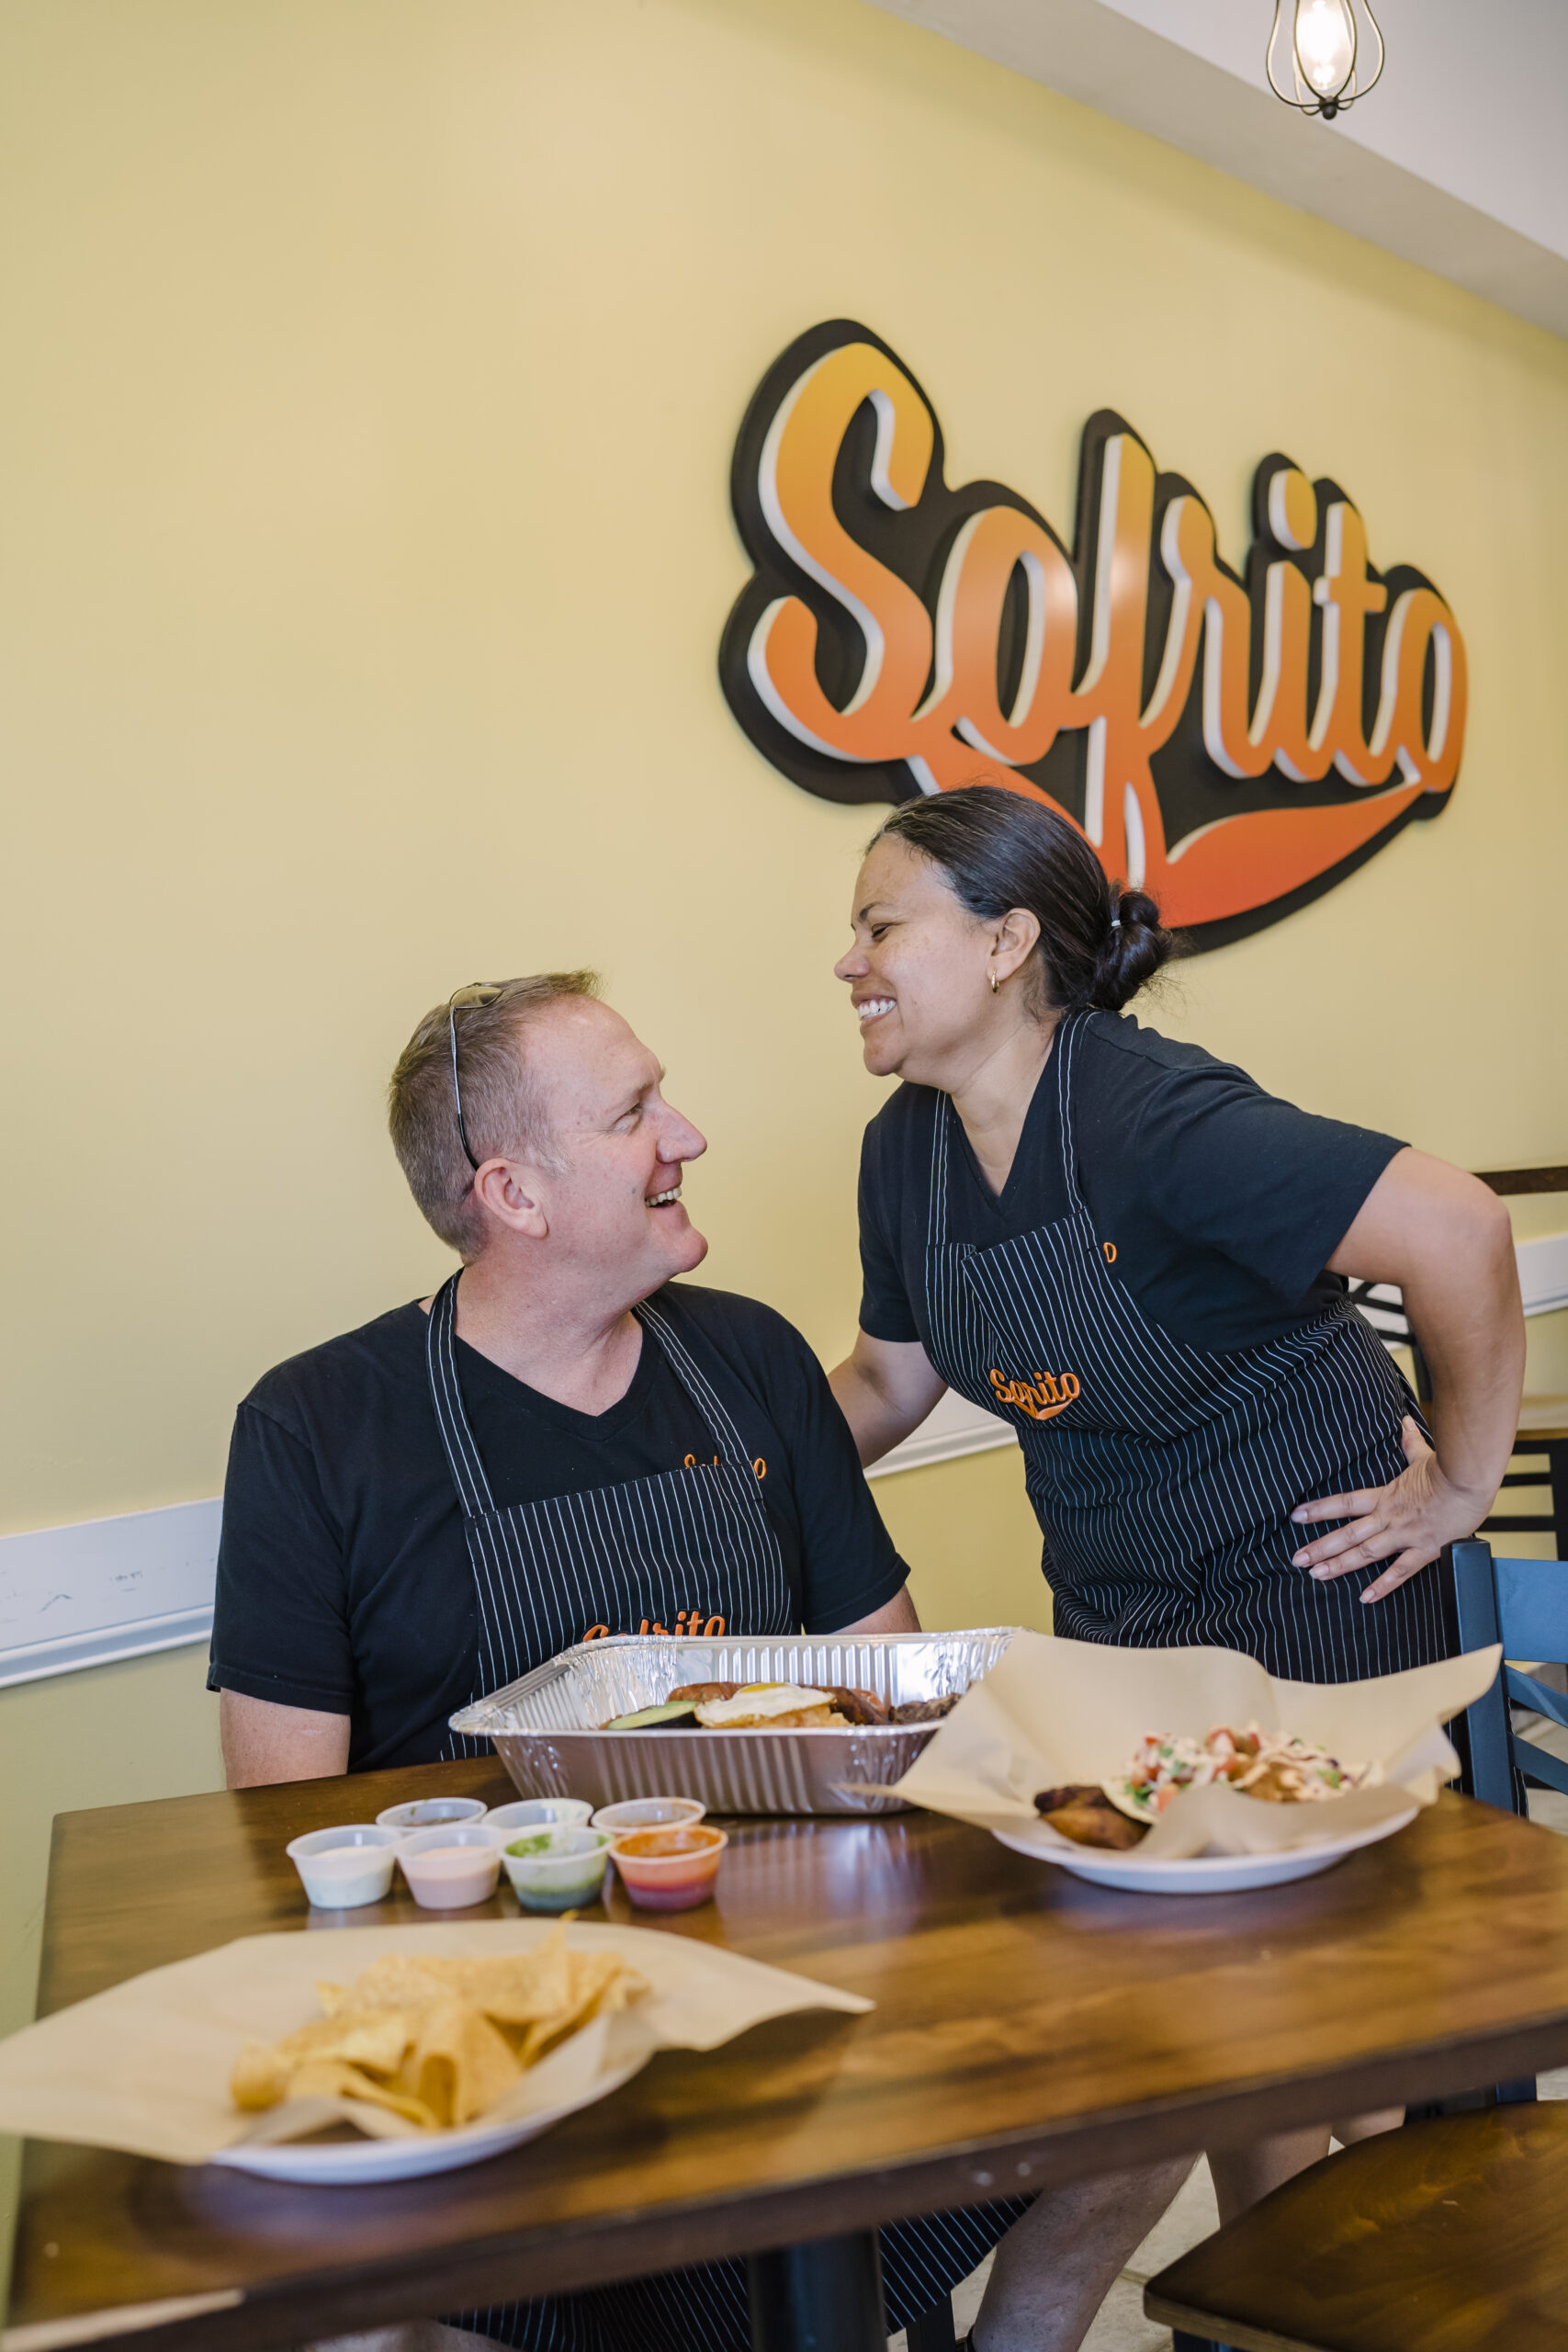 Steve and Angelica White laugh together at their restaurant in High Point, NC – Sofrito Latin street food.